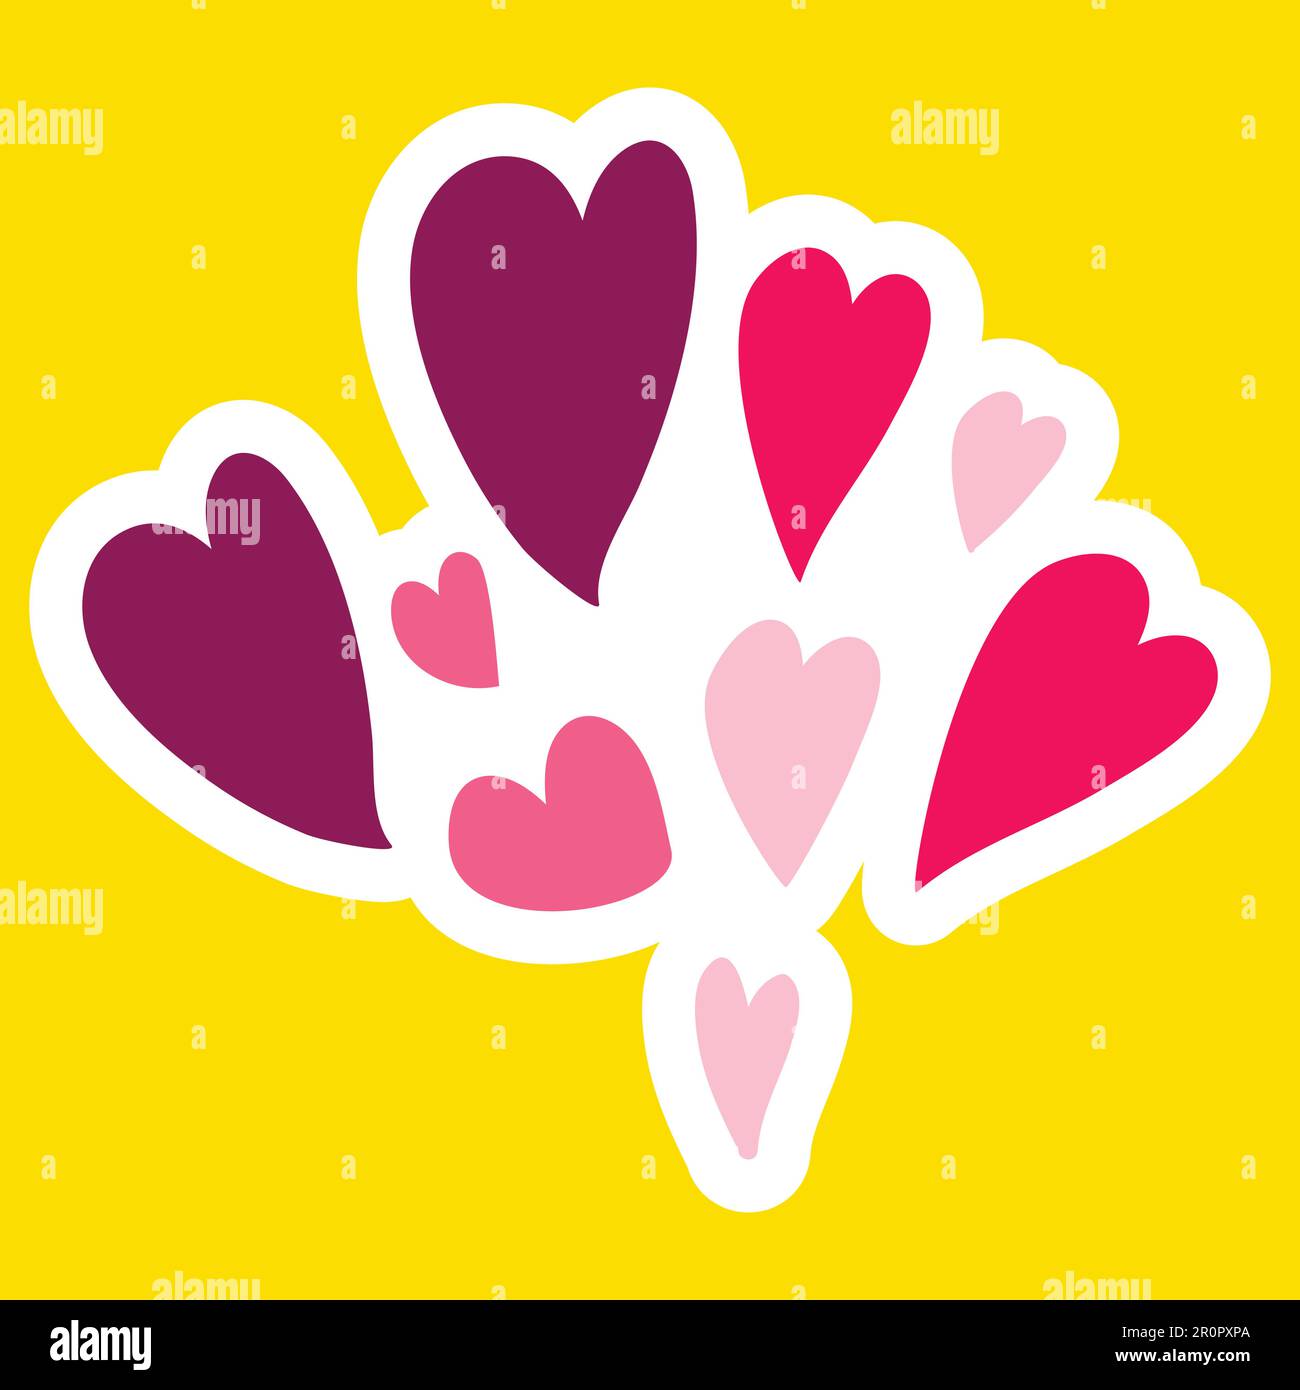 Cute girly stickers cartoon doodle hearts Vector Image